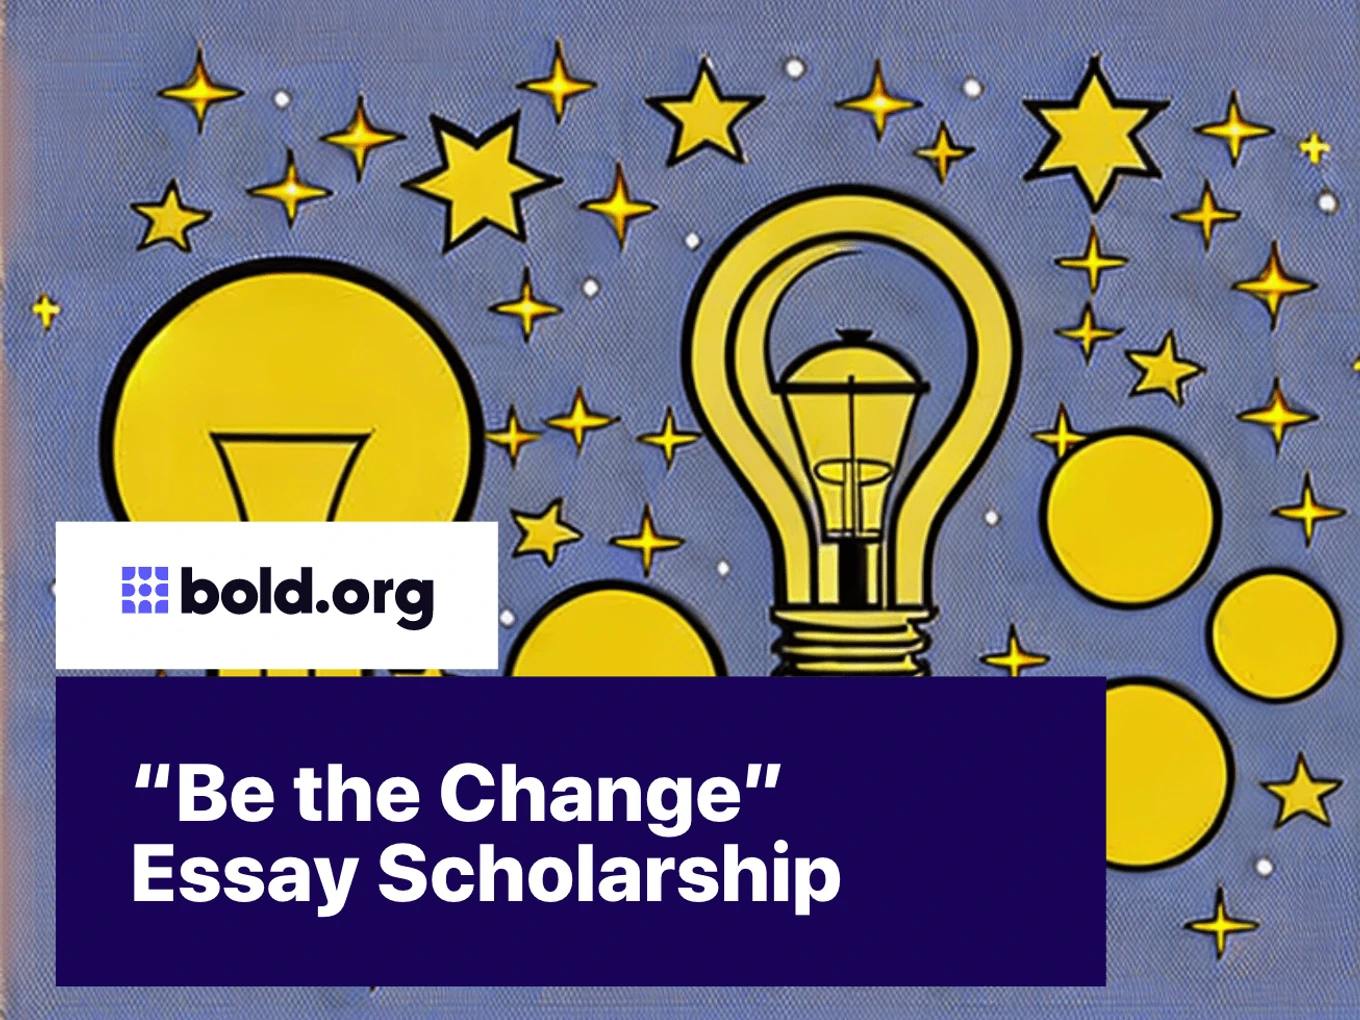 “Be the Change” Essay Scholarship